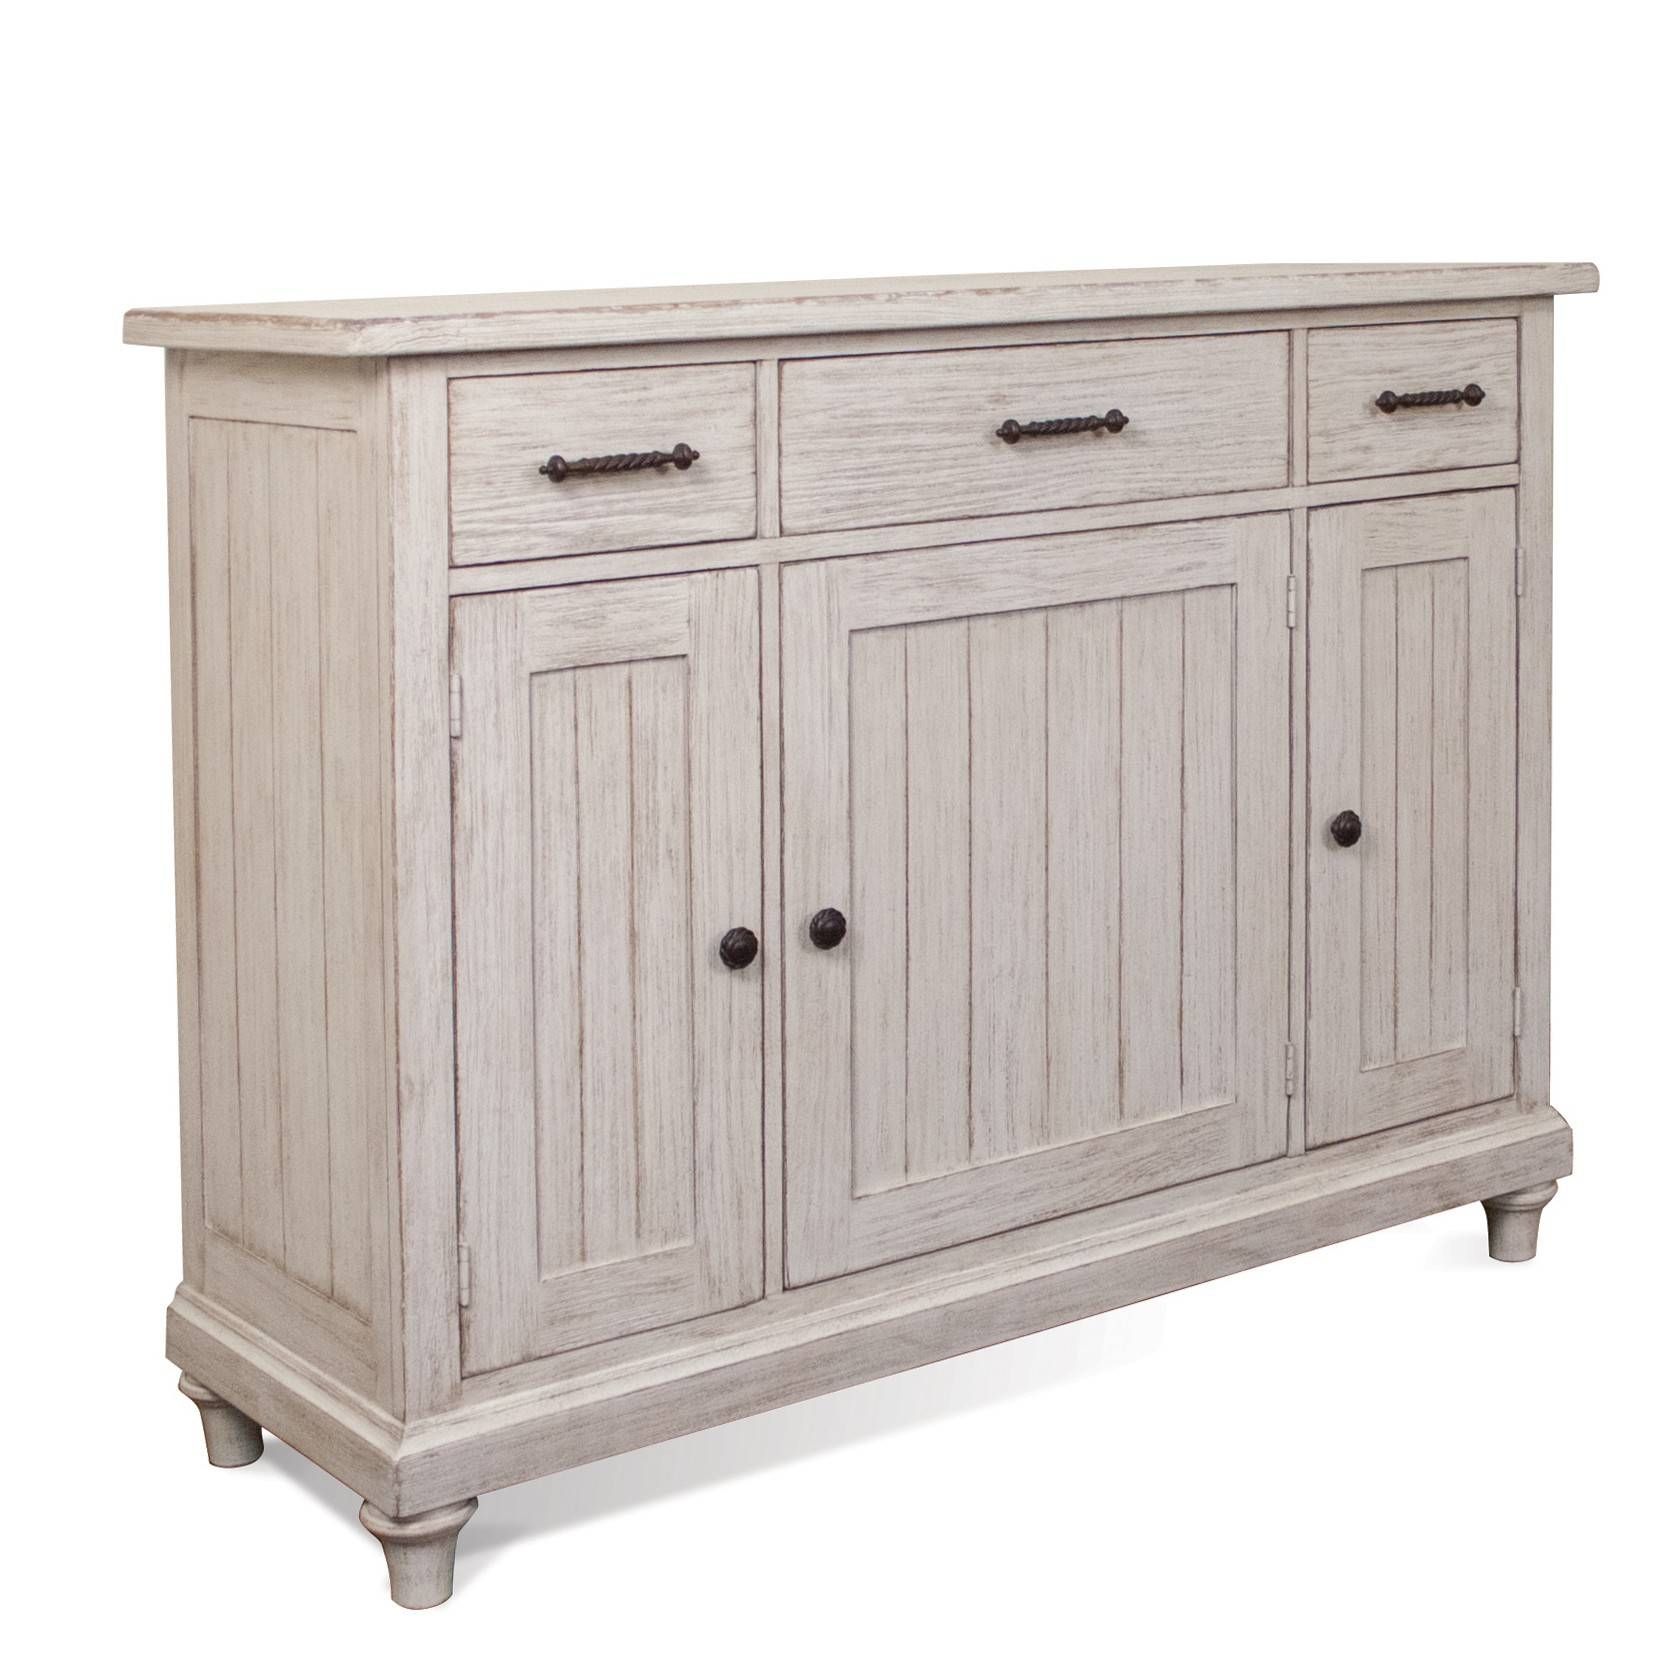 Aberdeen Wood Sideboard Server In Weathered Worn White | Humble Abode Inside White Sideboard Furniture (View 8 of 15)